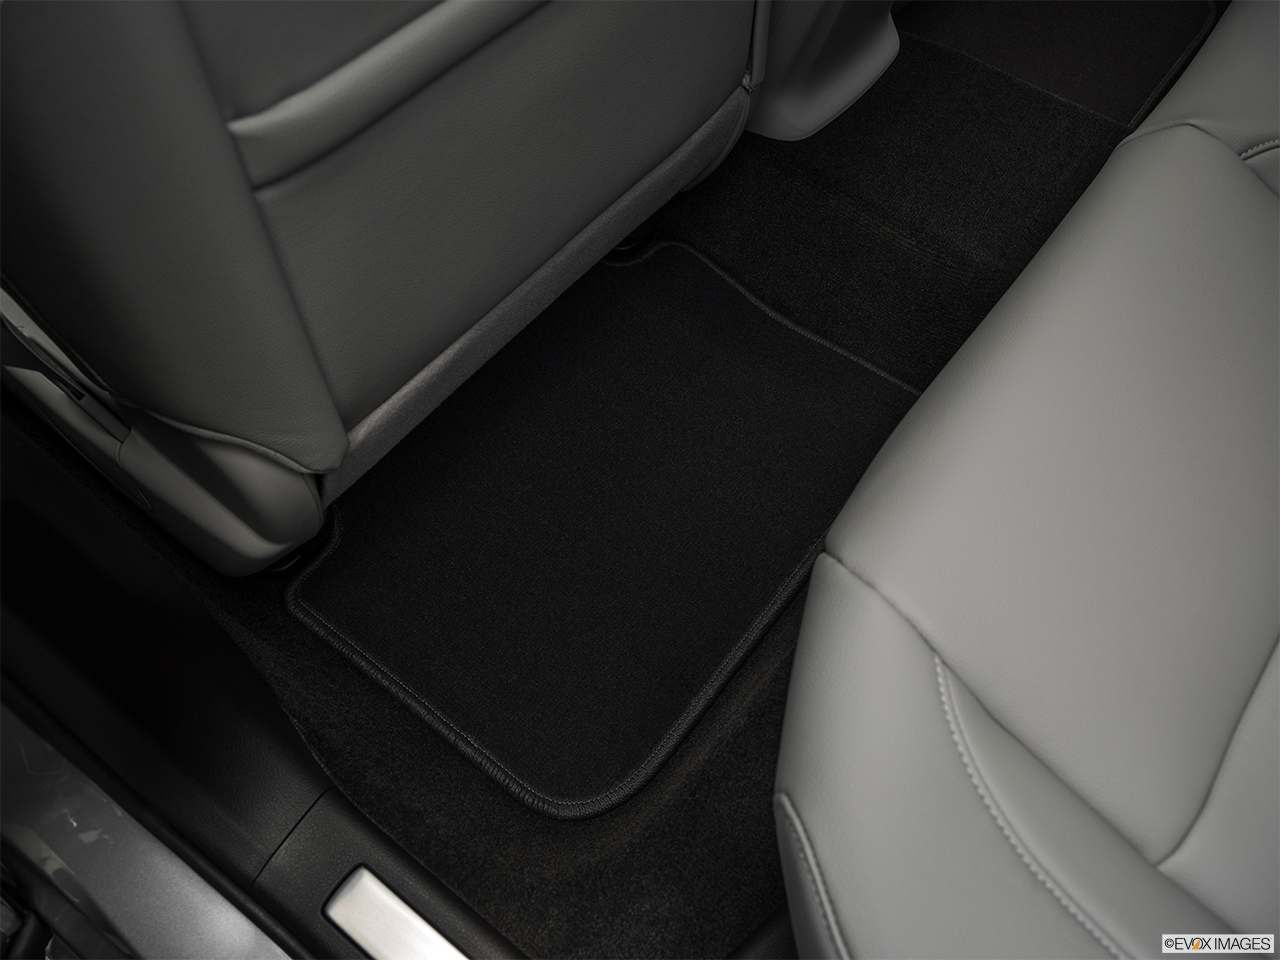 2019 Acura TLX 2.4 8-DCT P-AWS Rear driver's side floor mat. Mid-seat level from outside looking in. 